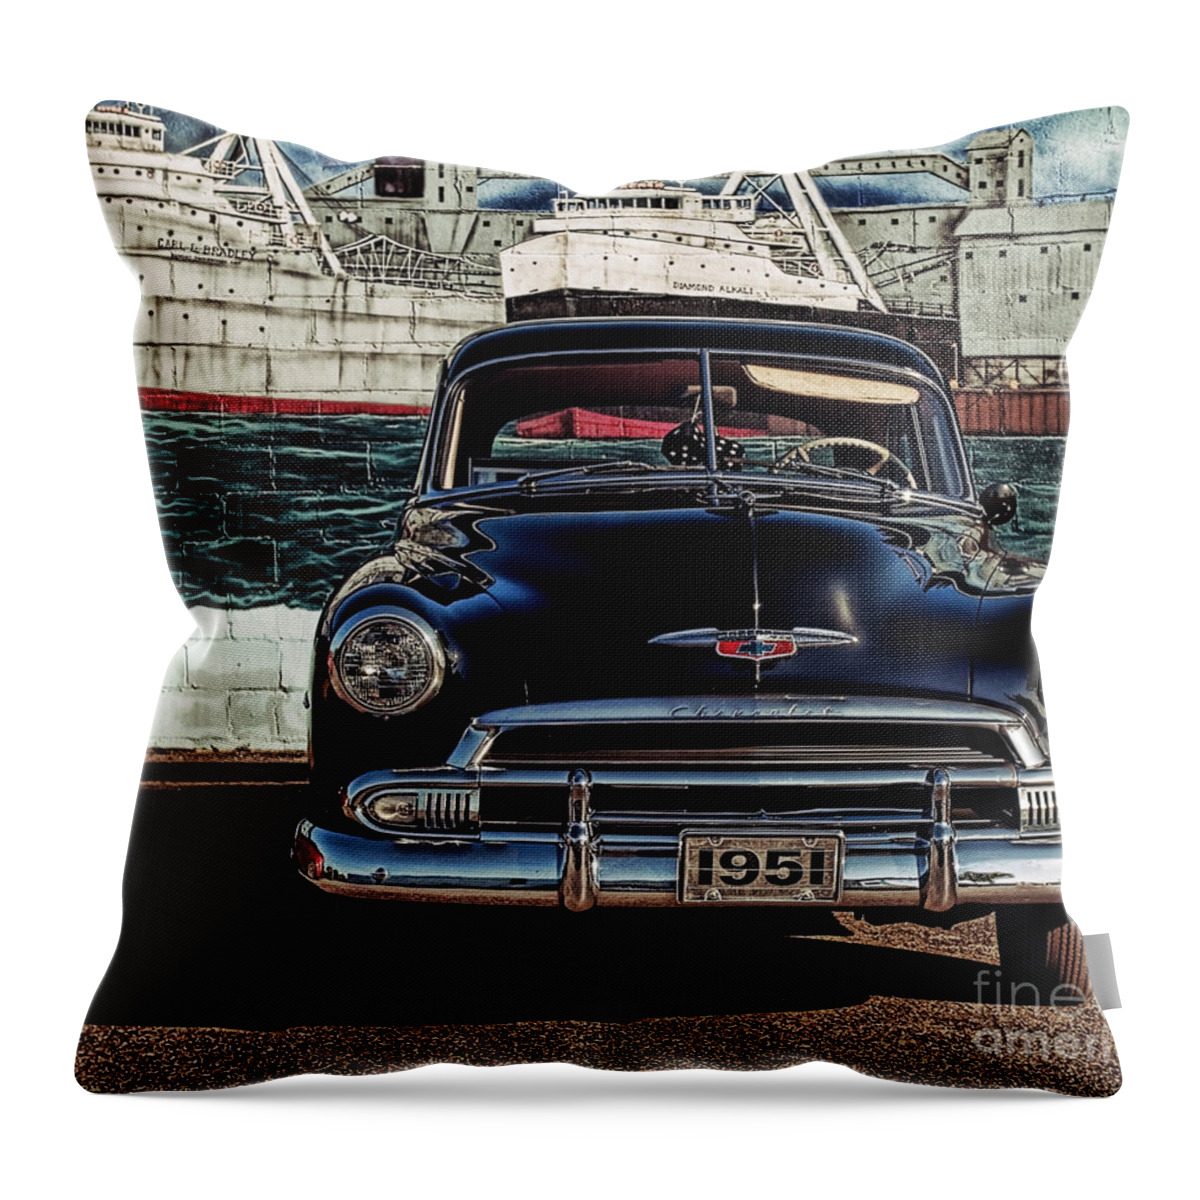 Car Throw Pillow featuring the photograph 1951 by Terry Doyle